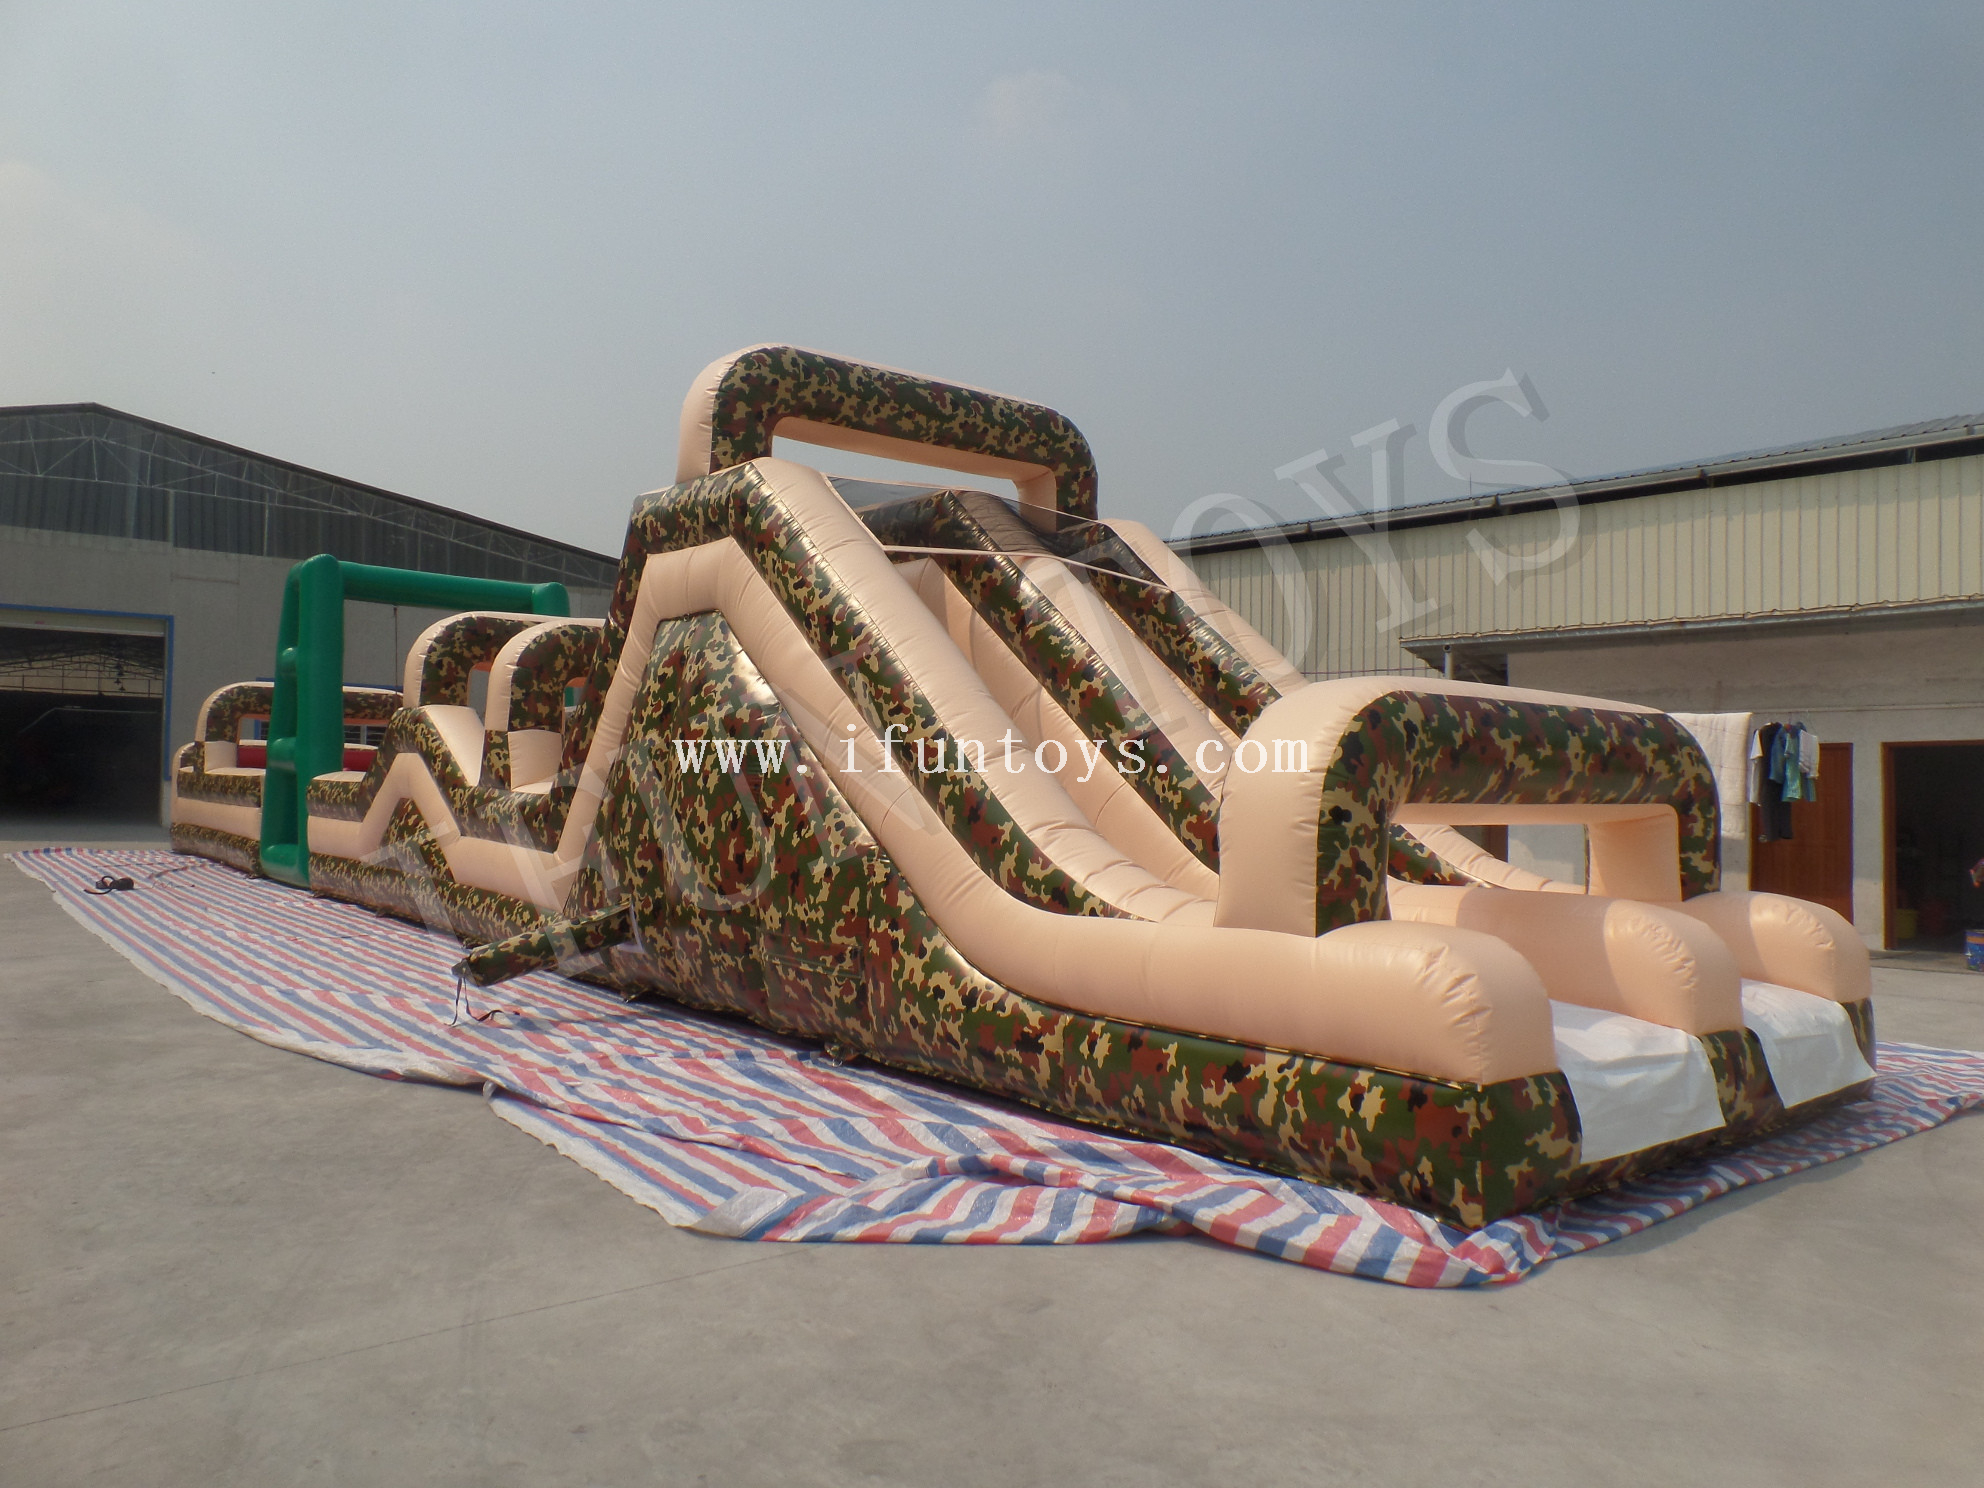 Boot Camp Inflatable Obstacle Challenge / Inflatable Military Obstacle Course